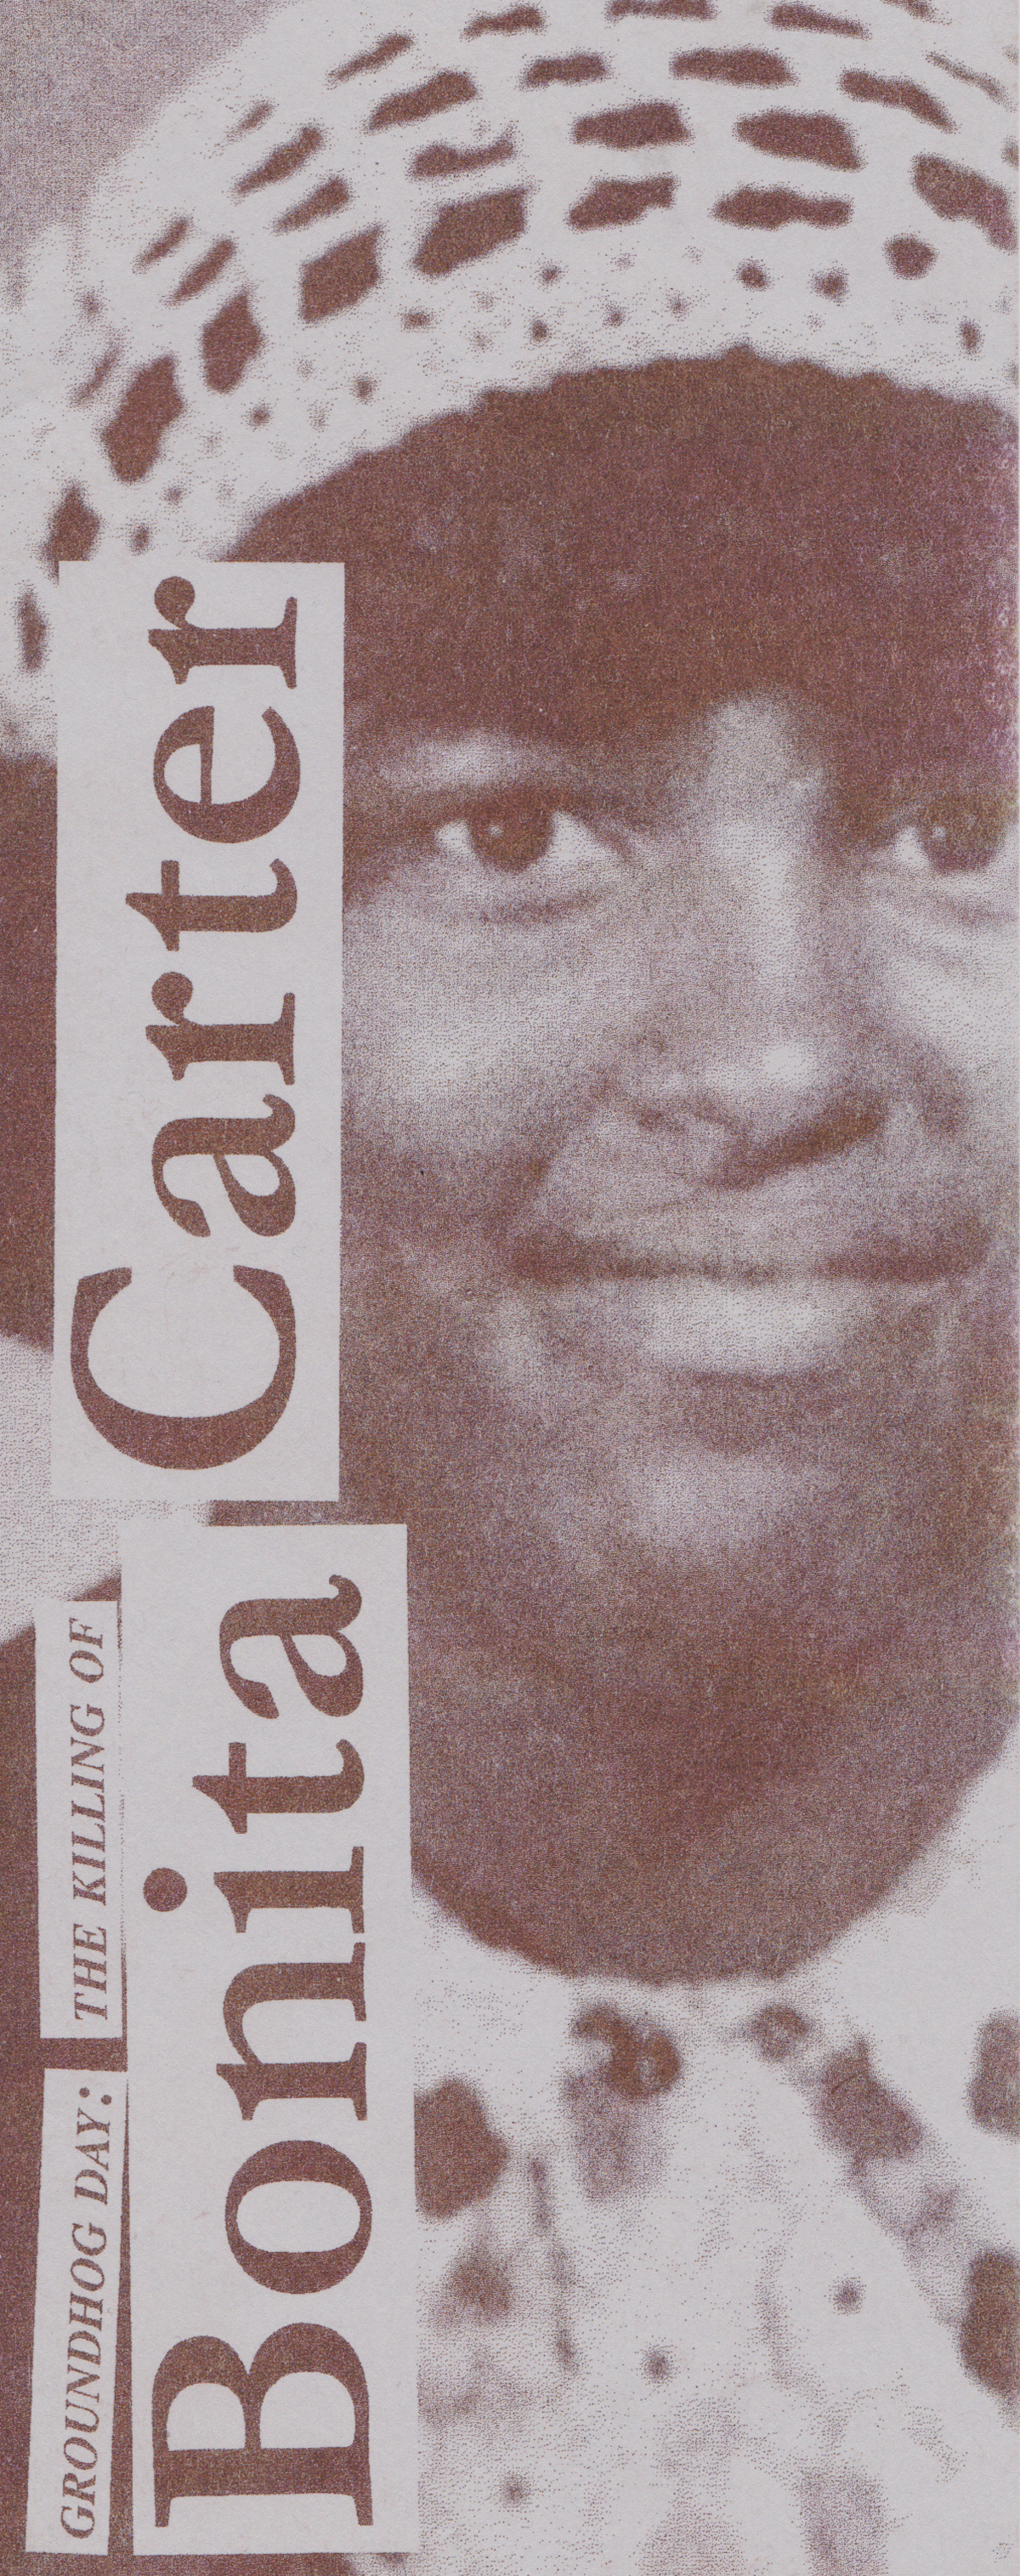 Front cover of the zine